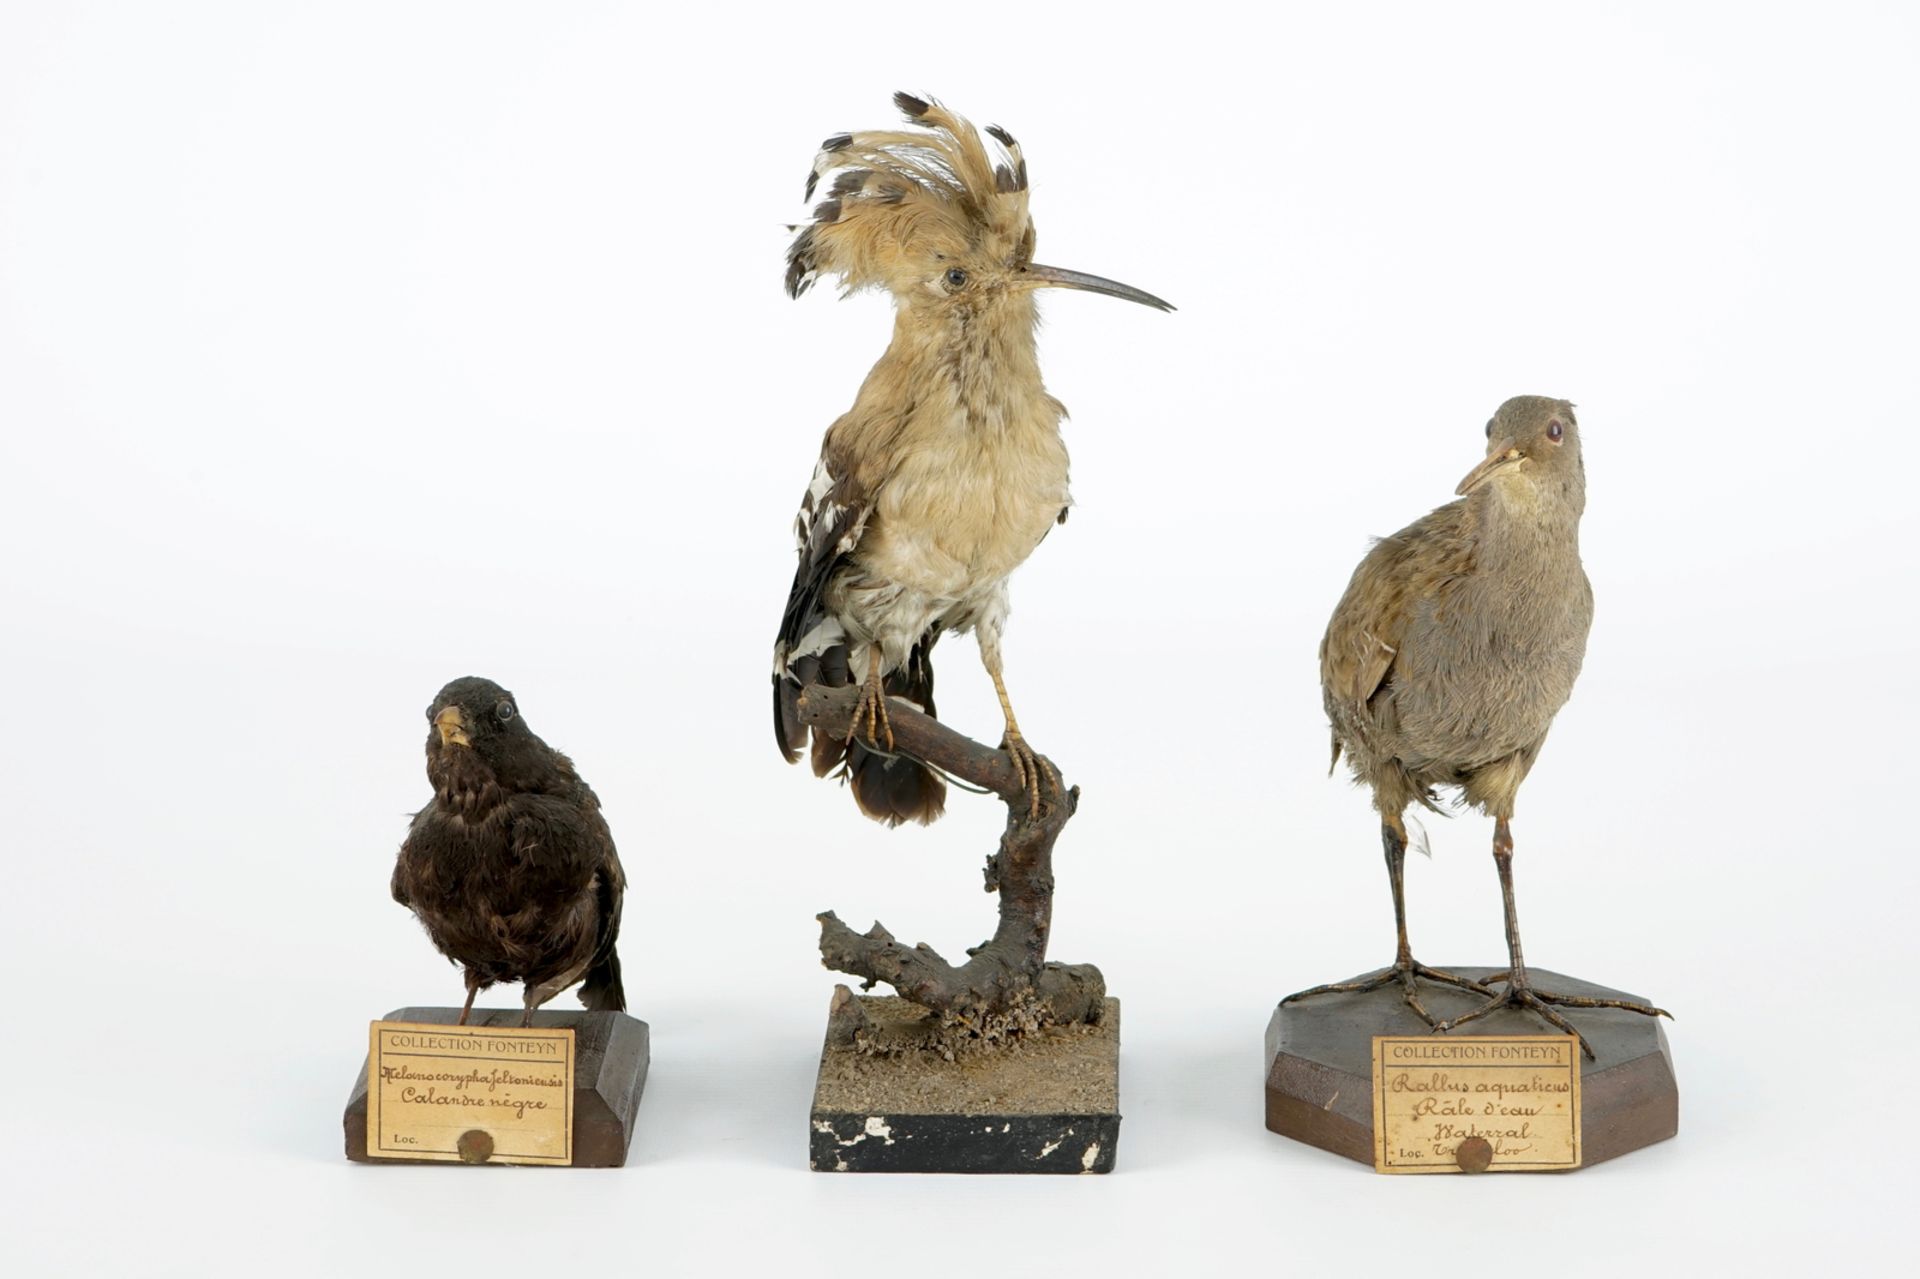 A collection of 5 birds, taxidermy, 19/20th C. H.: 47 cm (the tallest) Two labelled "Collection - Image 8 of 11